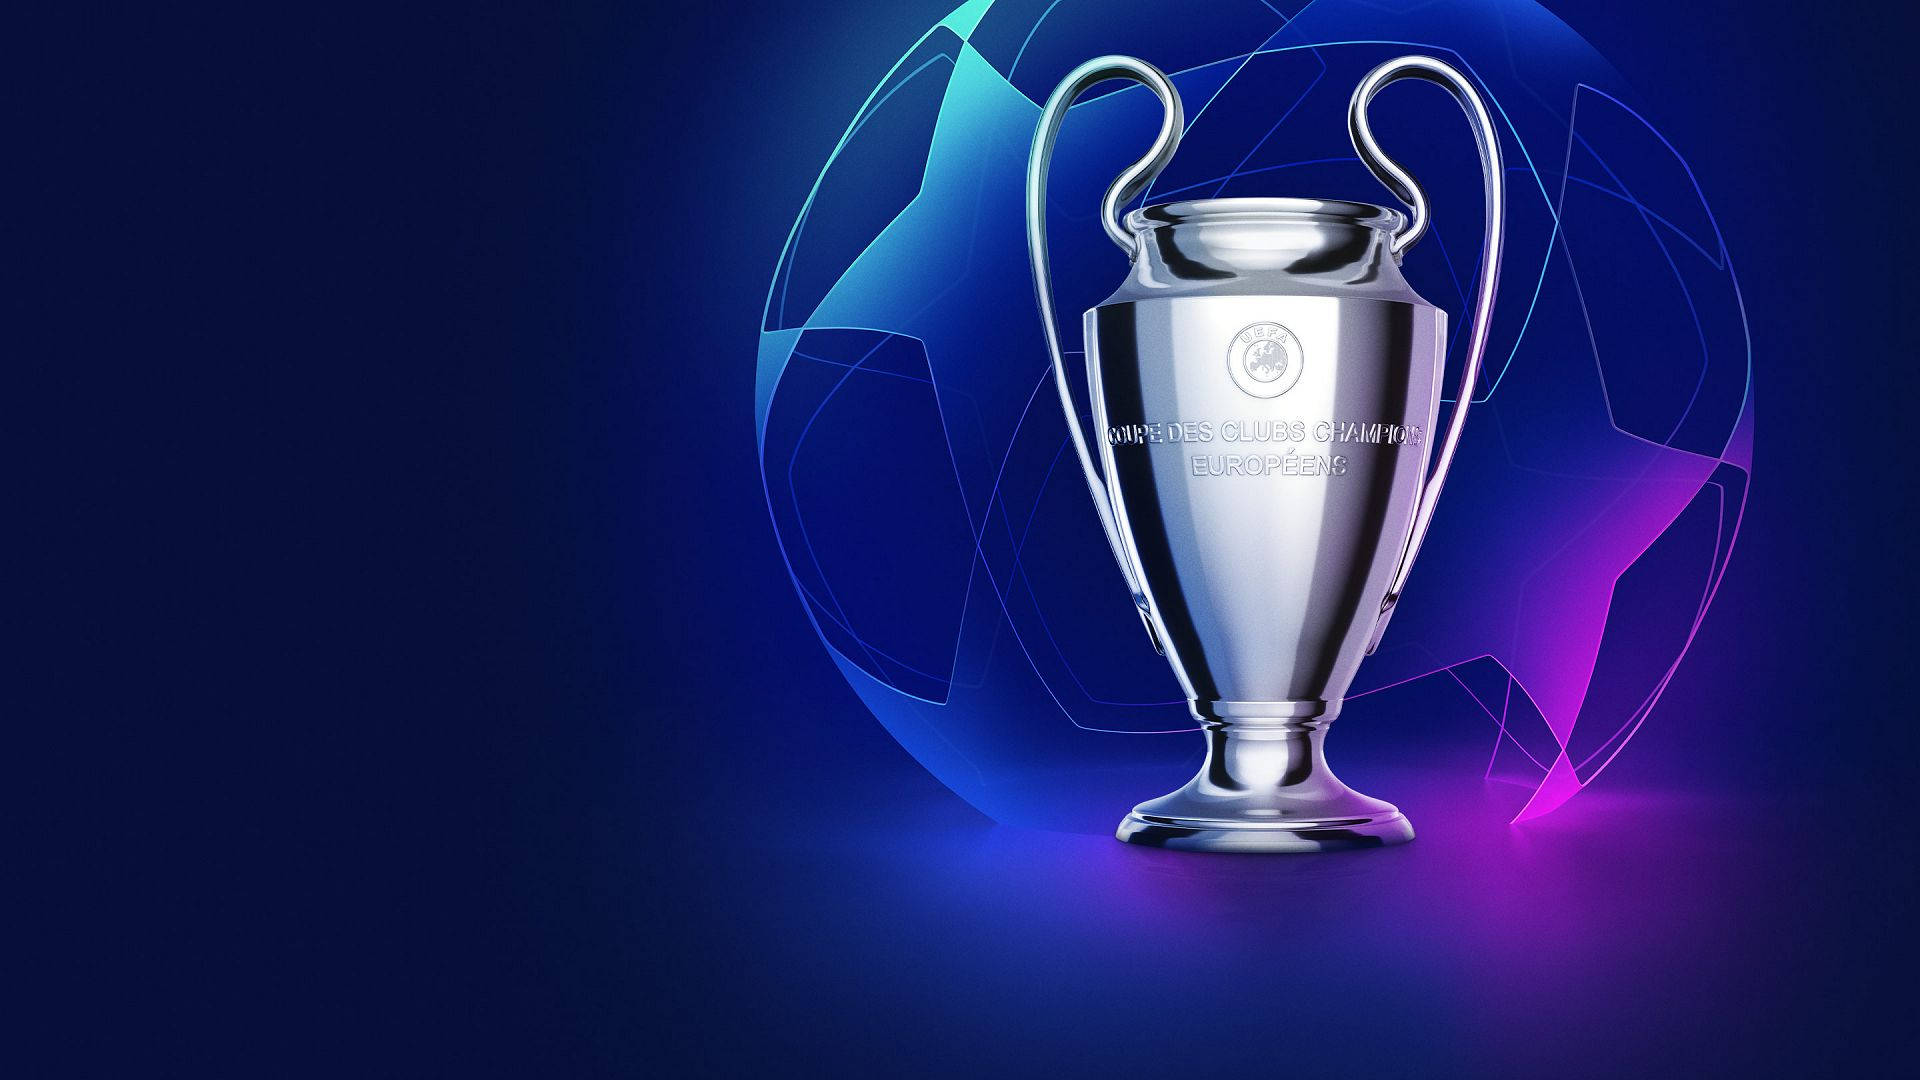 Champions League Wallpapers on WallpaperDog